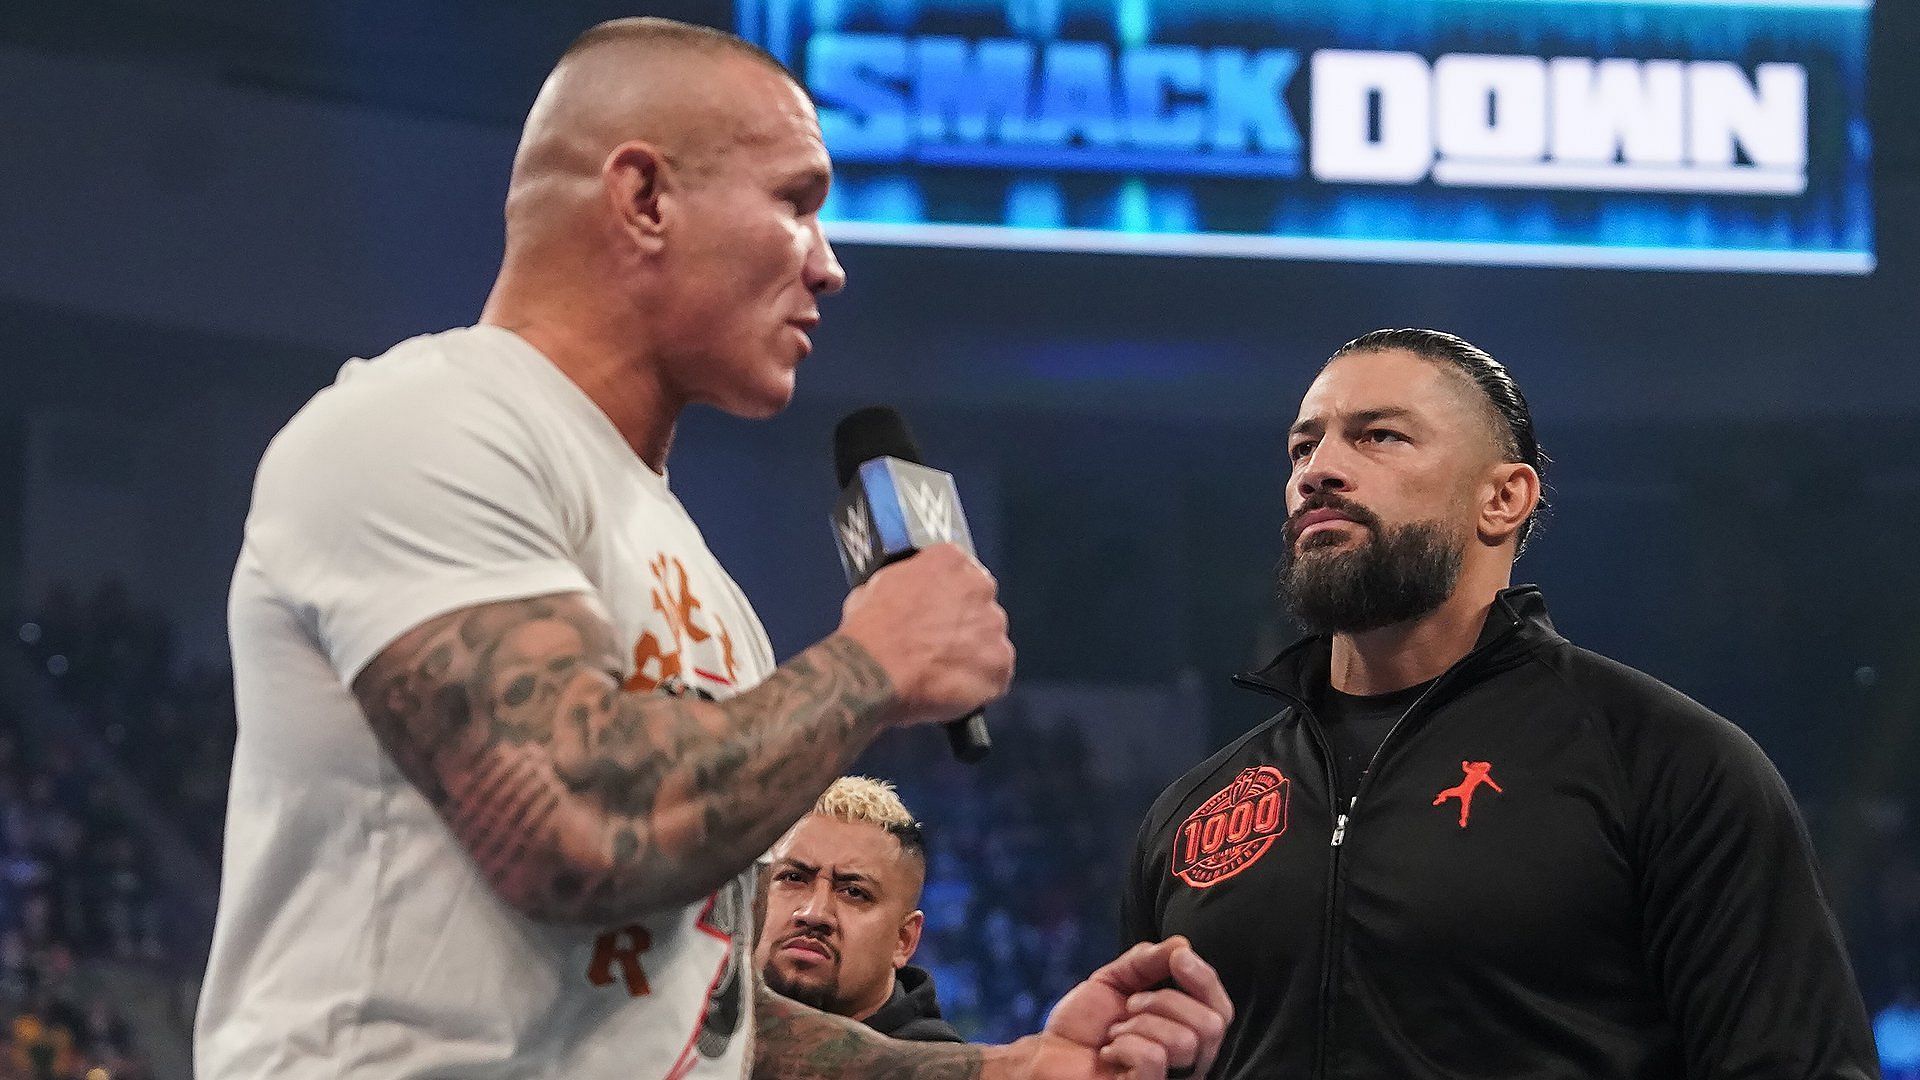 Randy Orton and Roman Reigns on SmackDown.